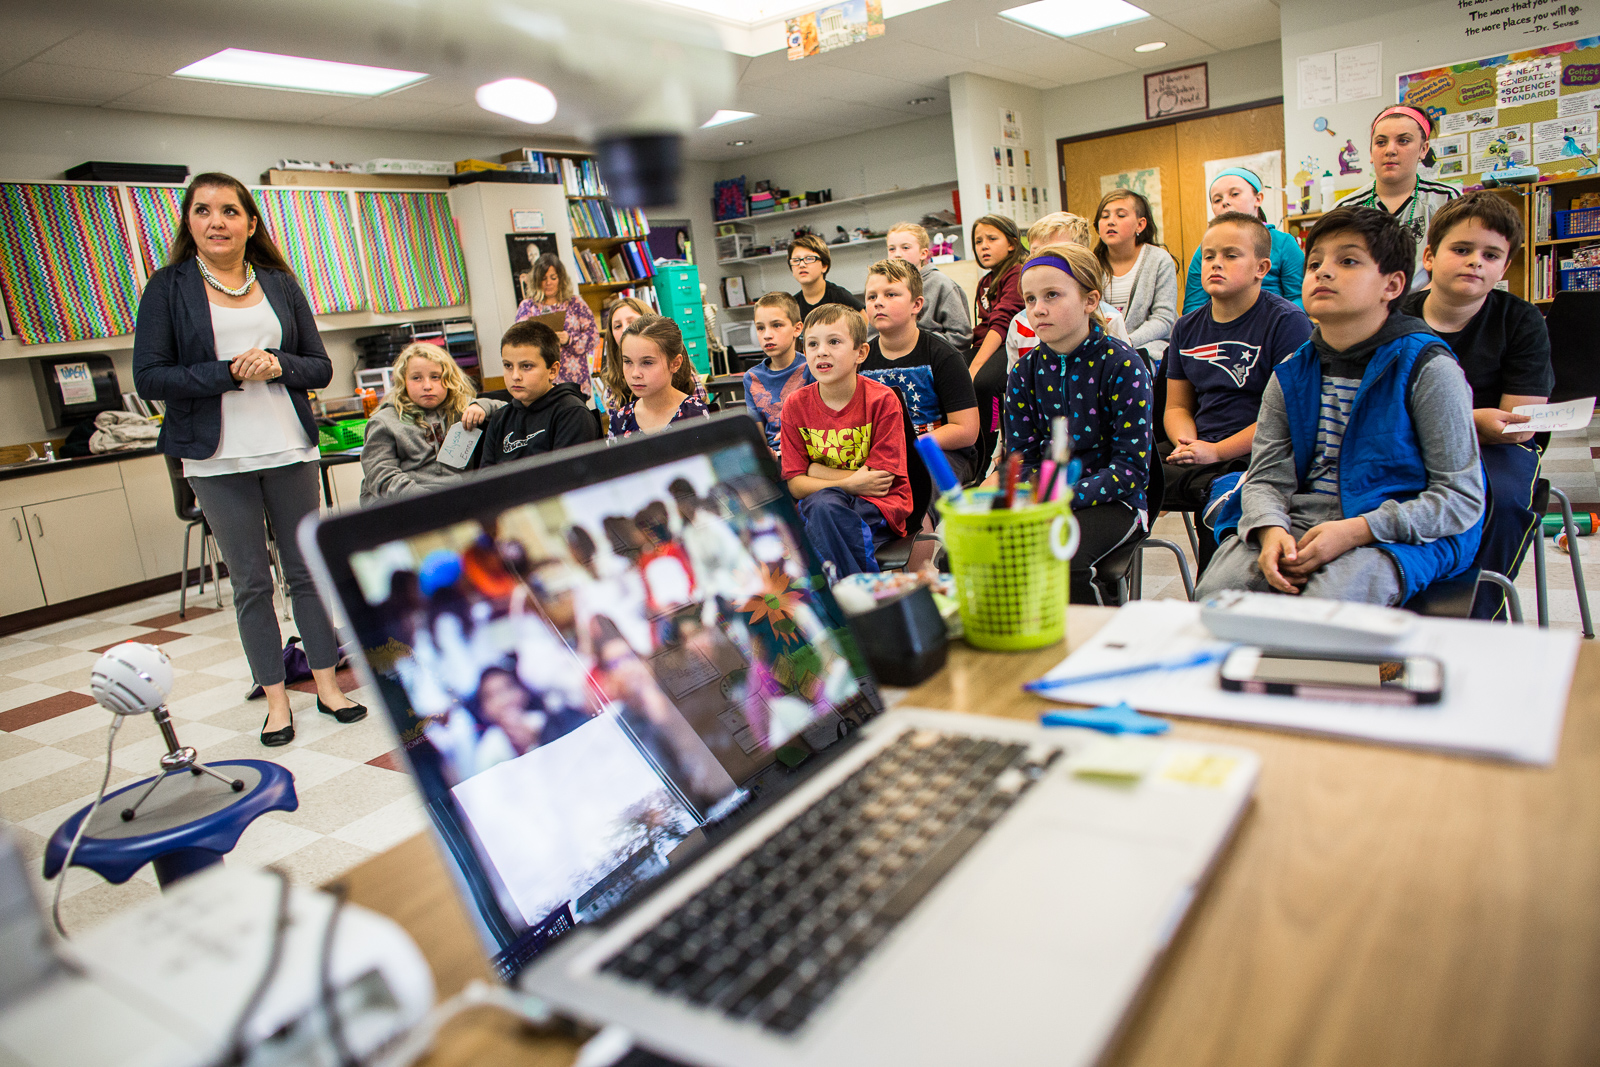 Teacher Kendra Myers and her fourth grade Bellows Free Academy class in Fairfax, Vermont during an exchange with a classroom in Tunisia on Thursday, October 20, 2016. by Monica Donovan for the George Lucas Educational Foundation